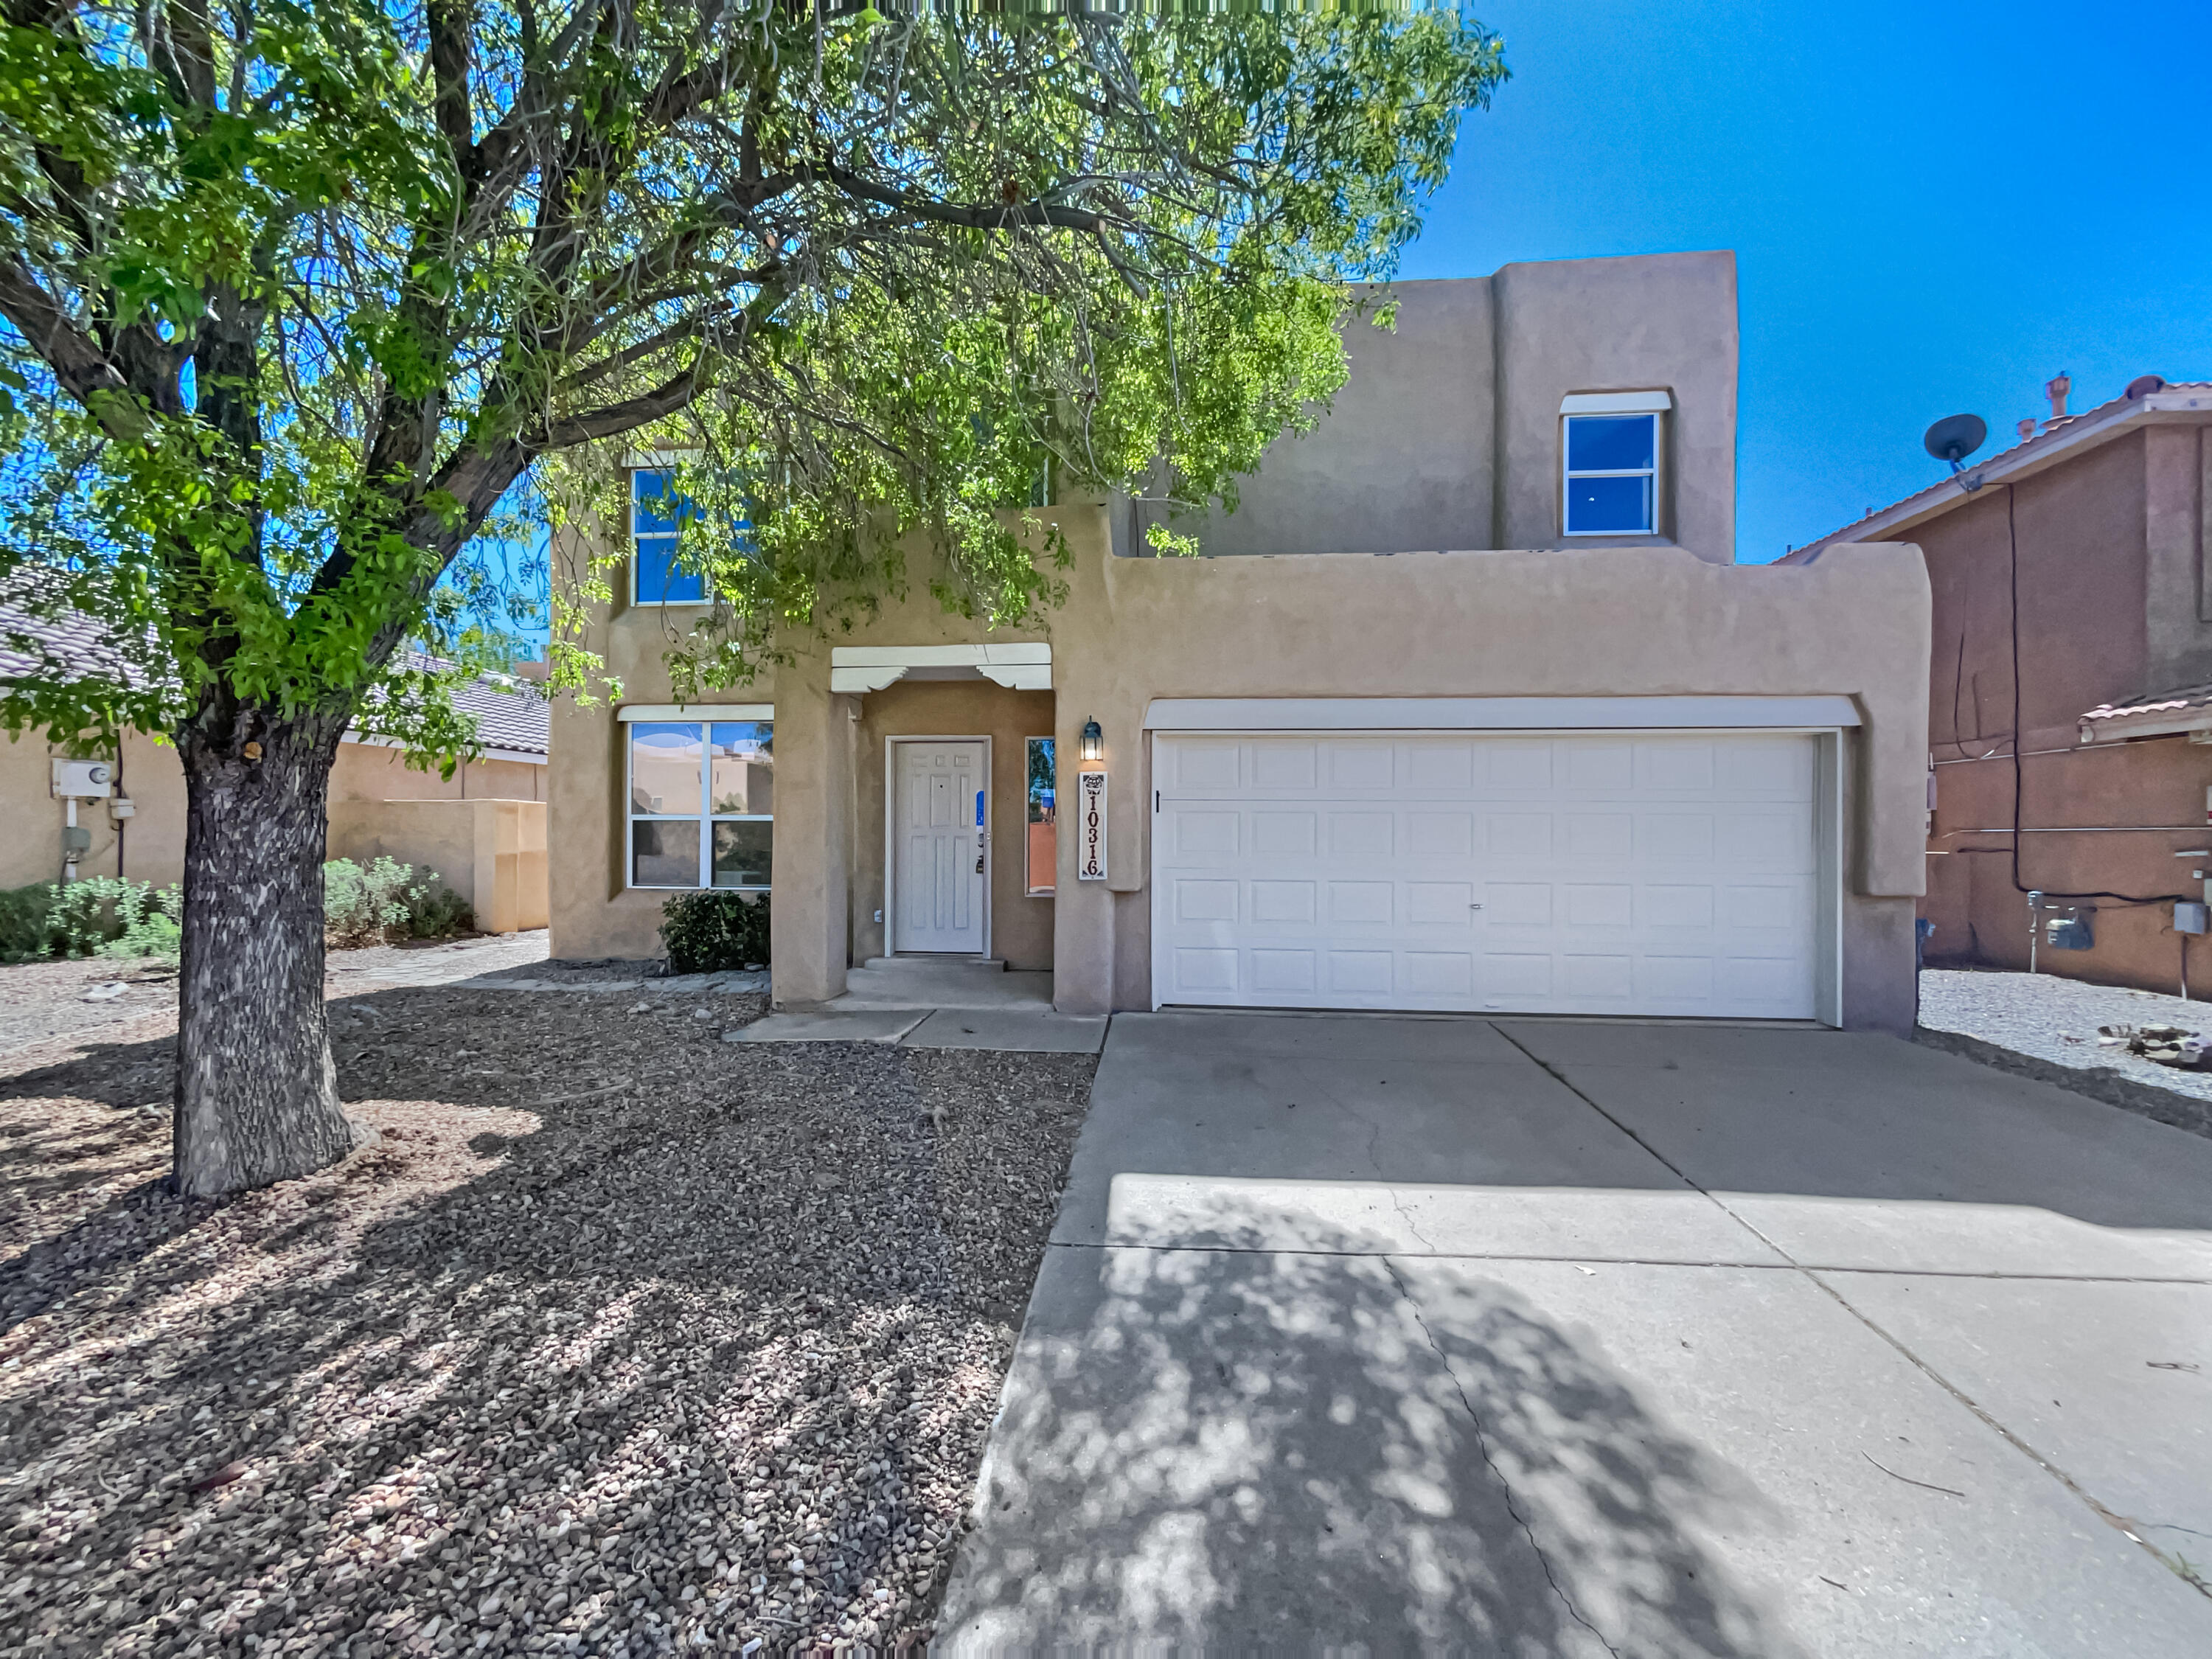 10316 Autumn Sage Drive NW, Albuquerque, New Mexico 87114, 4 Bedrooms Bedrooms, ,3 BathroomsBathrooms,Residential,For Sale,10316 Autumn Sage Drive NW,1061229